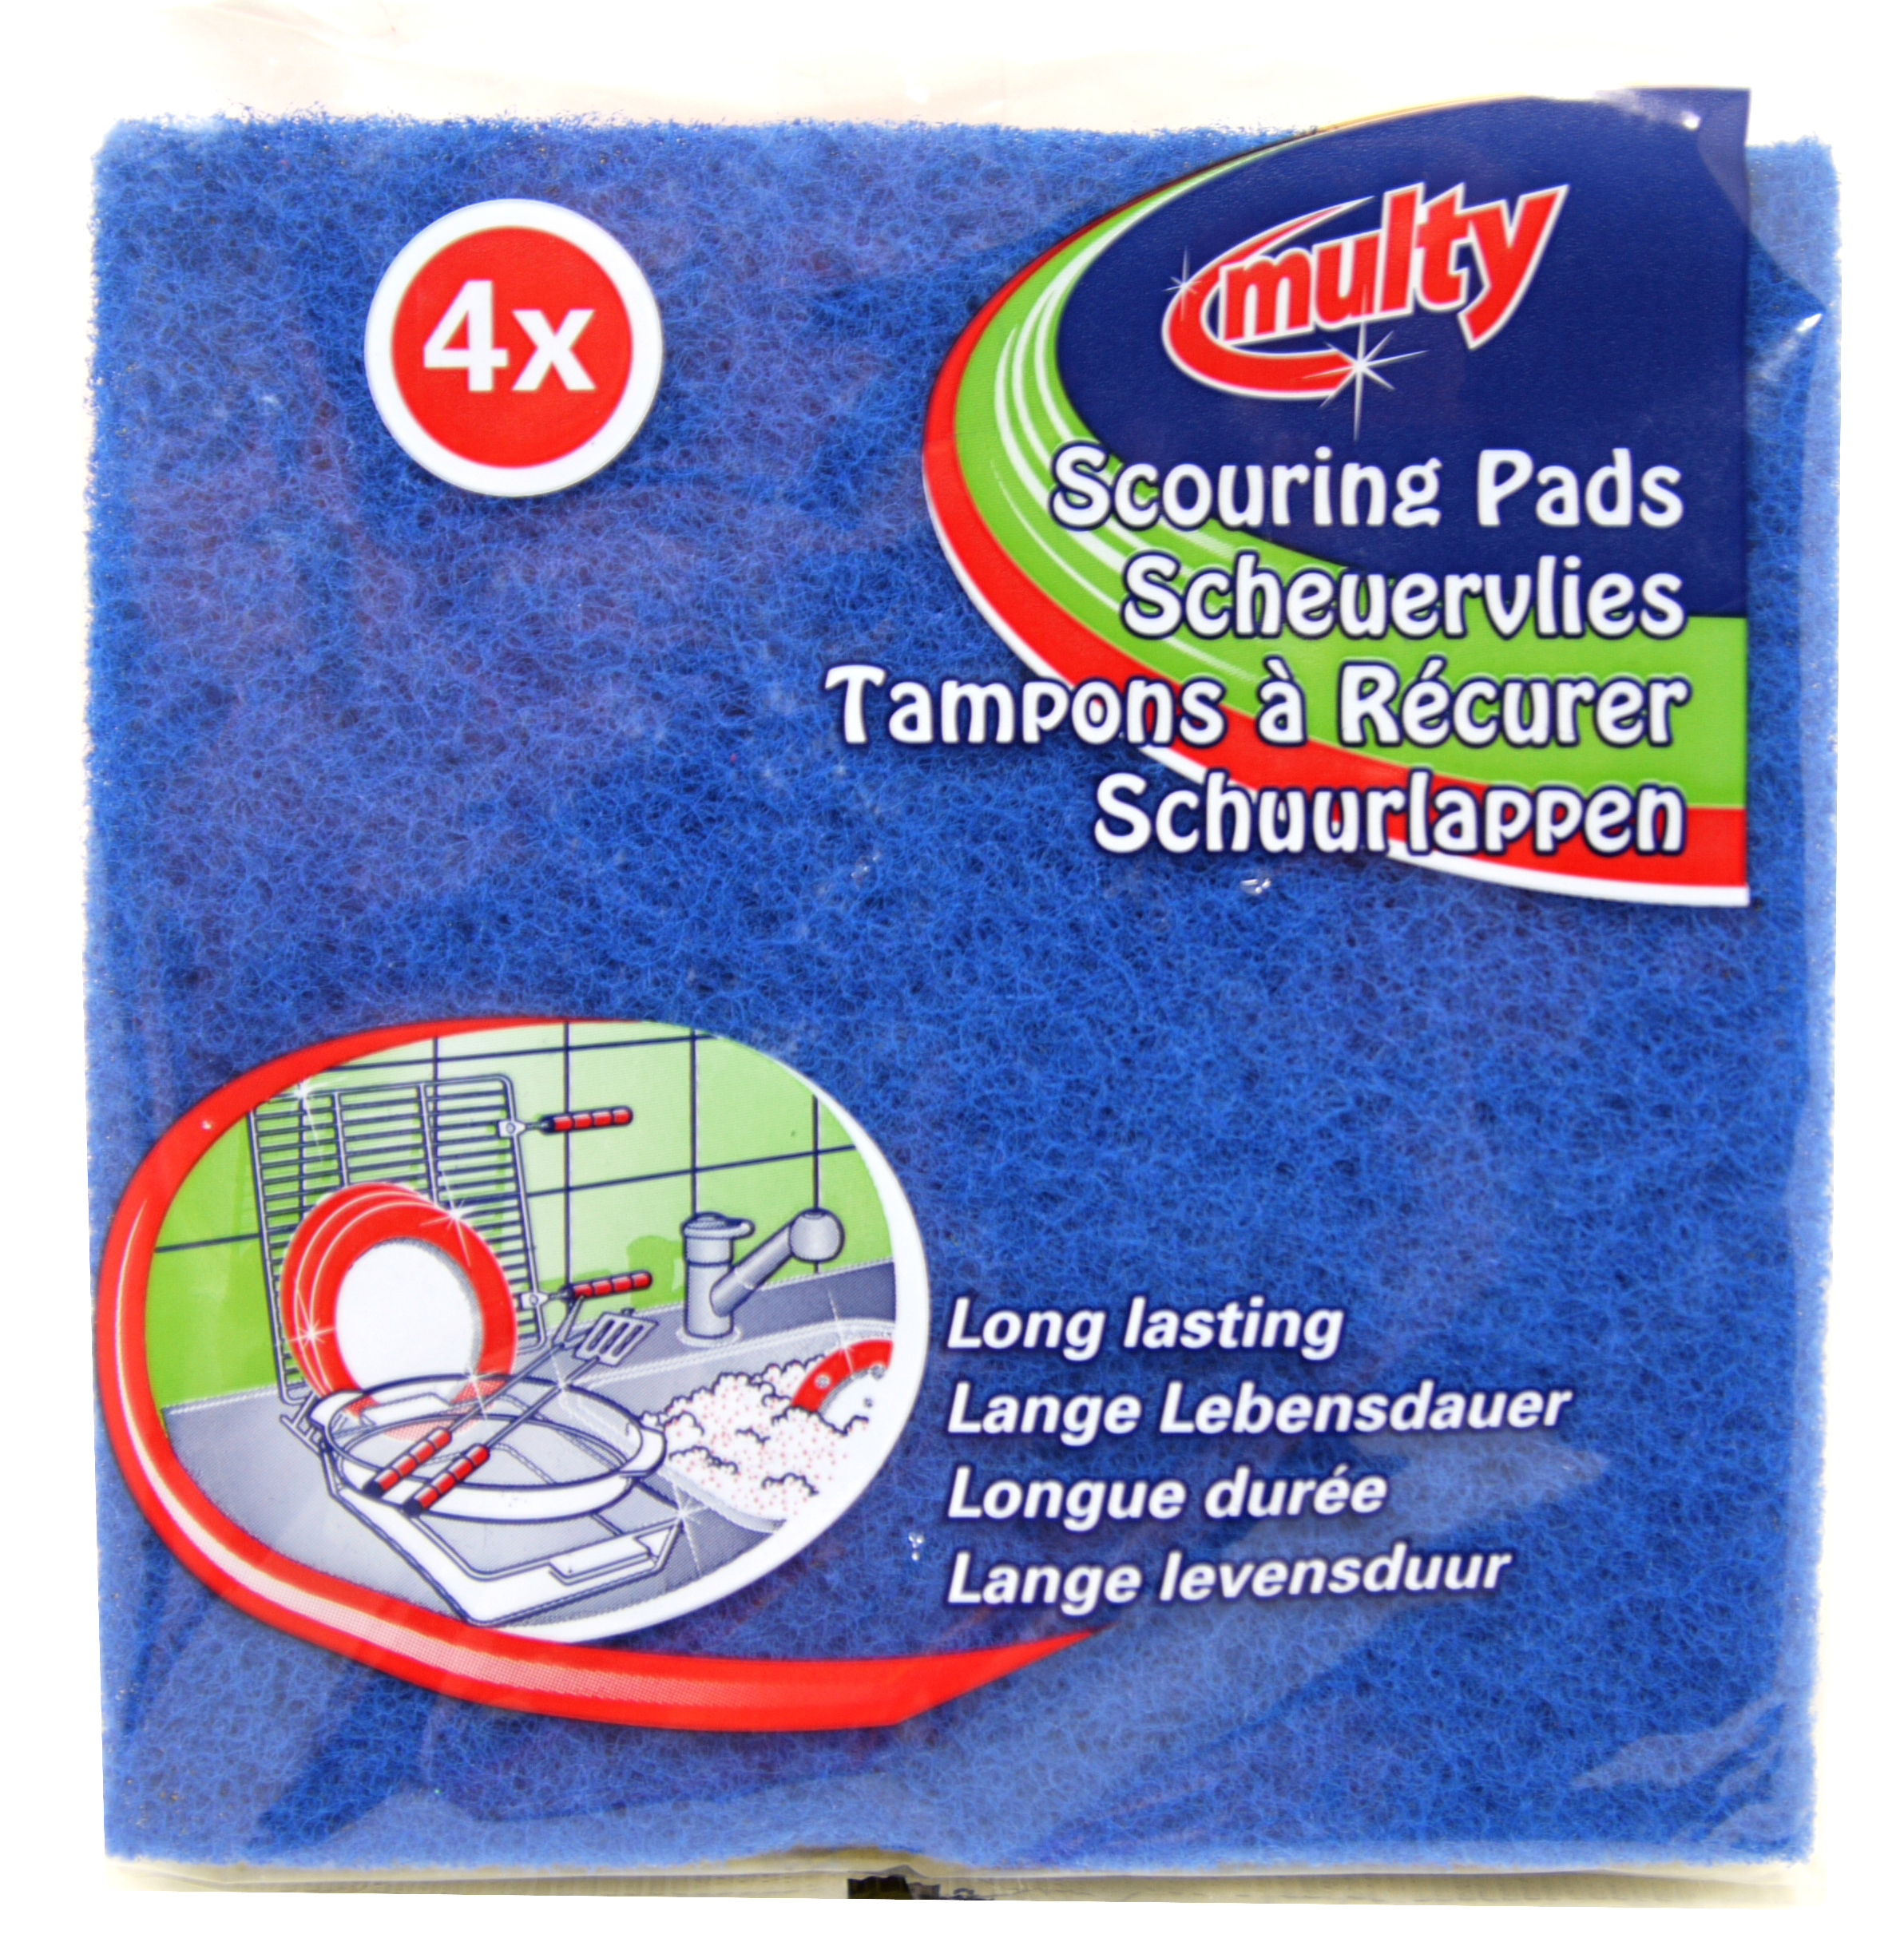 01320 - scouring pads pack of 4